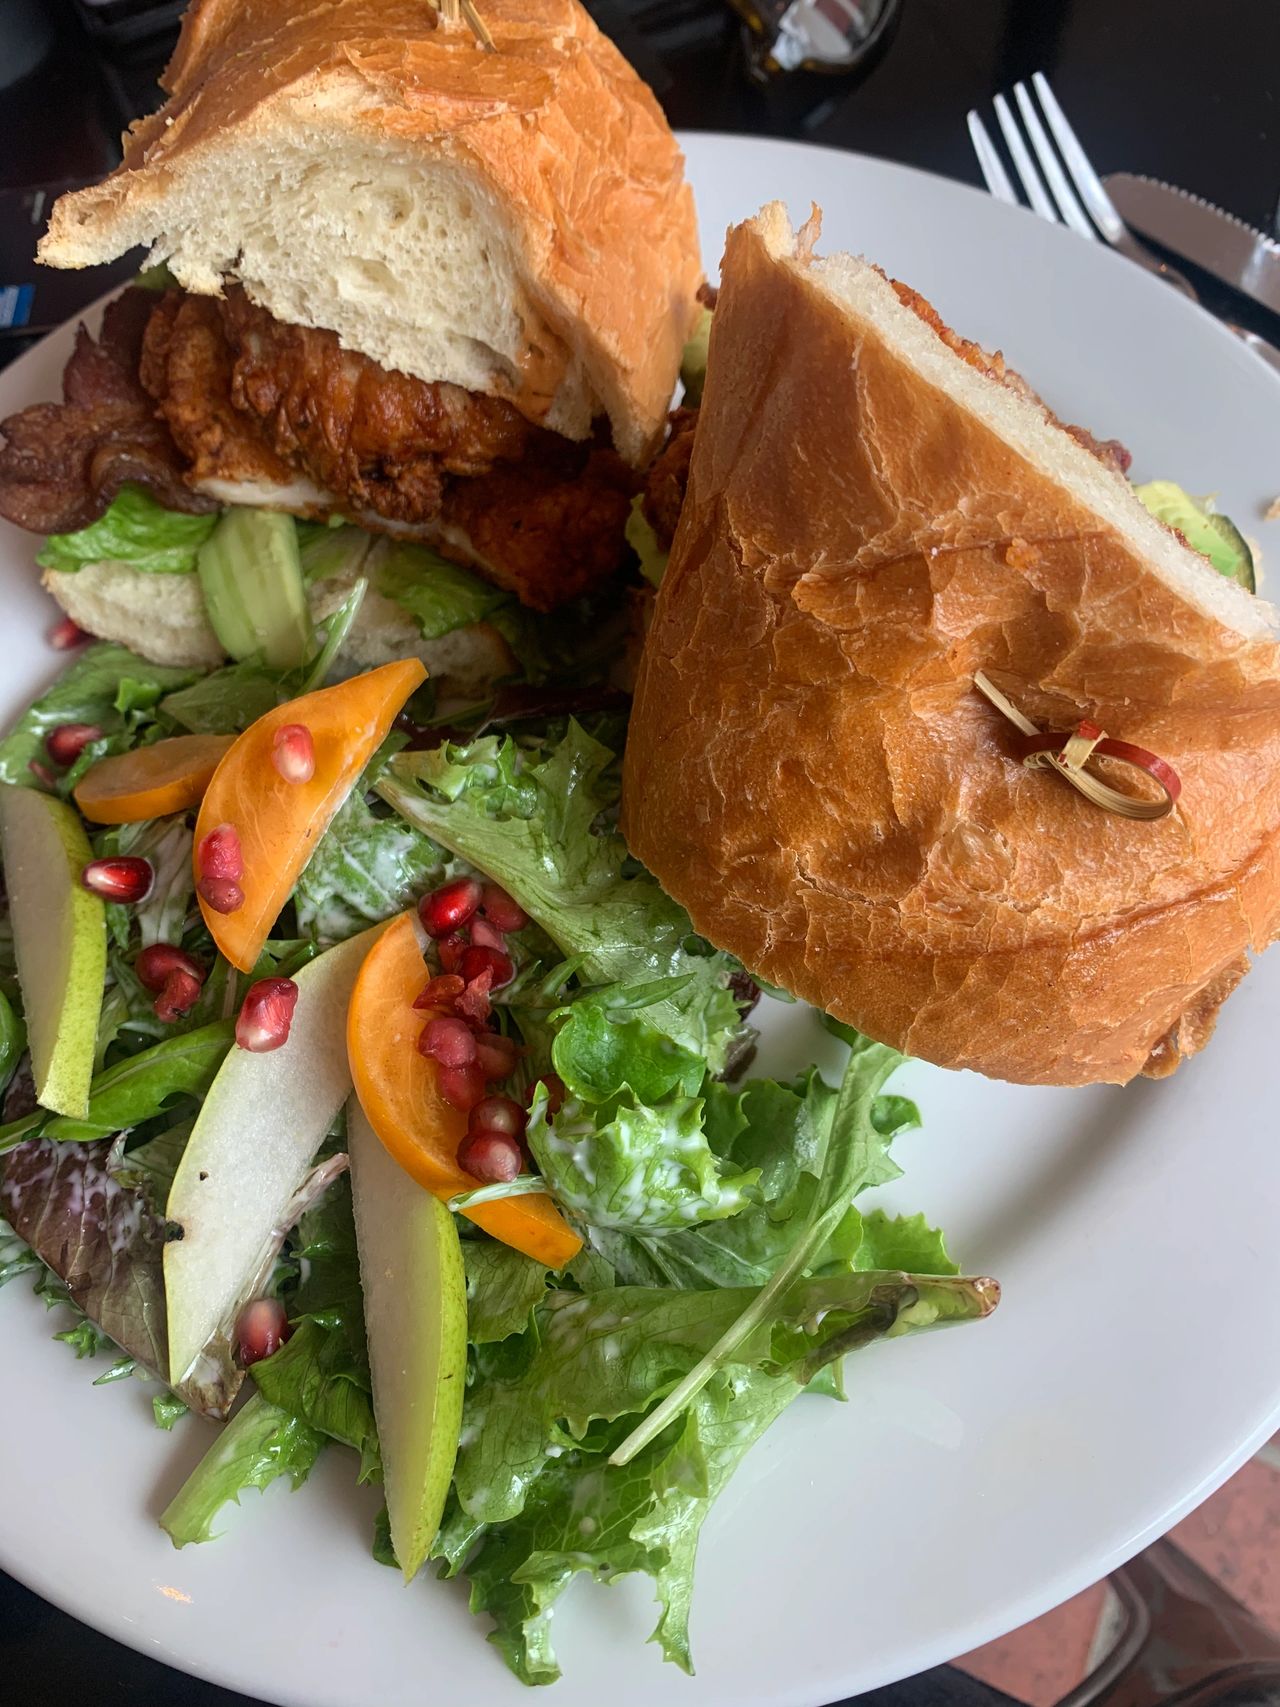 The tasty crispy chicken sandwich complete with a side salad